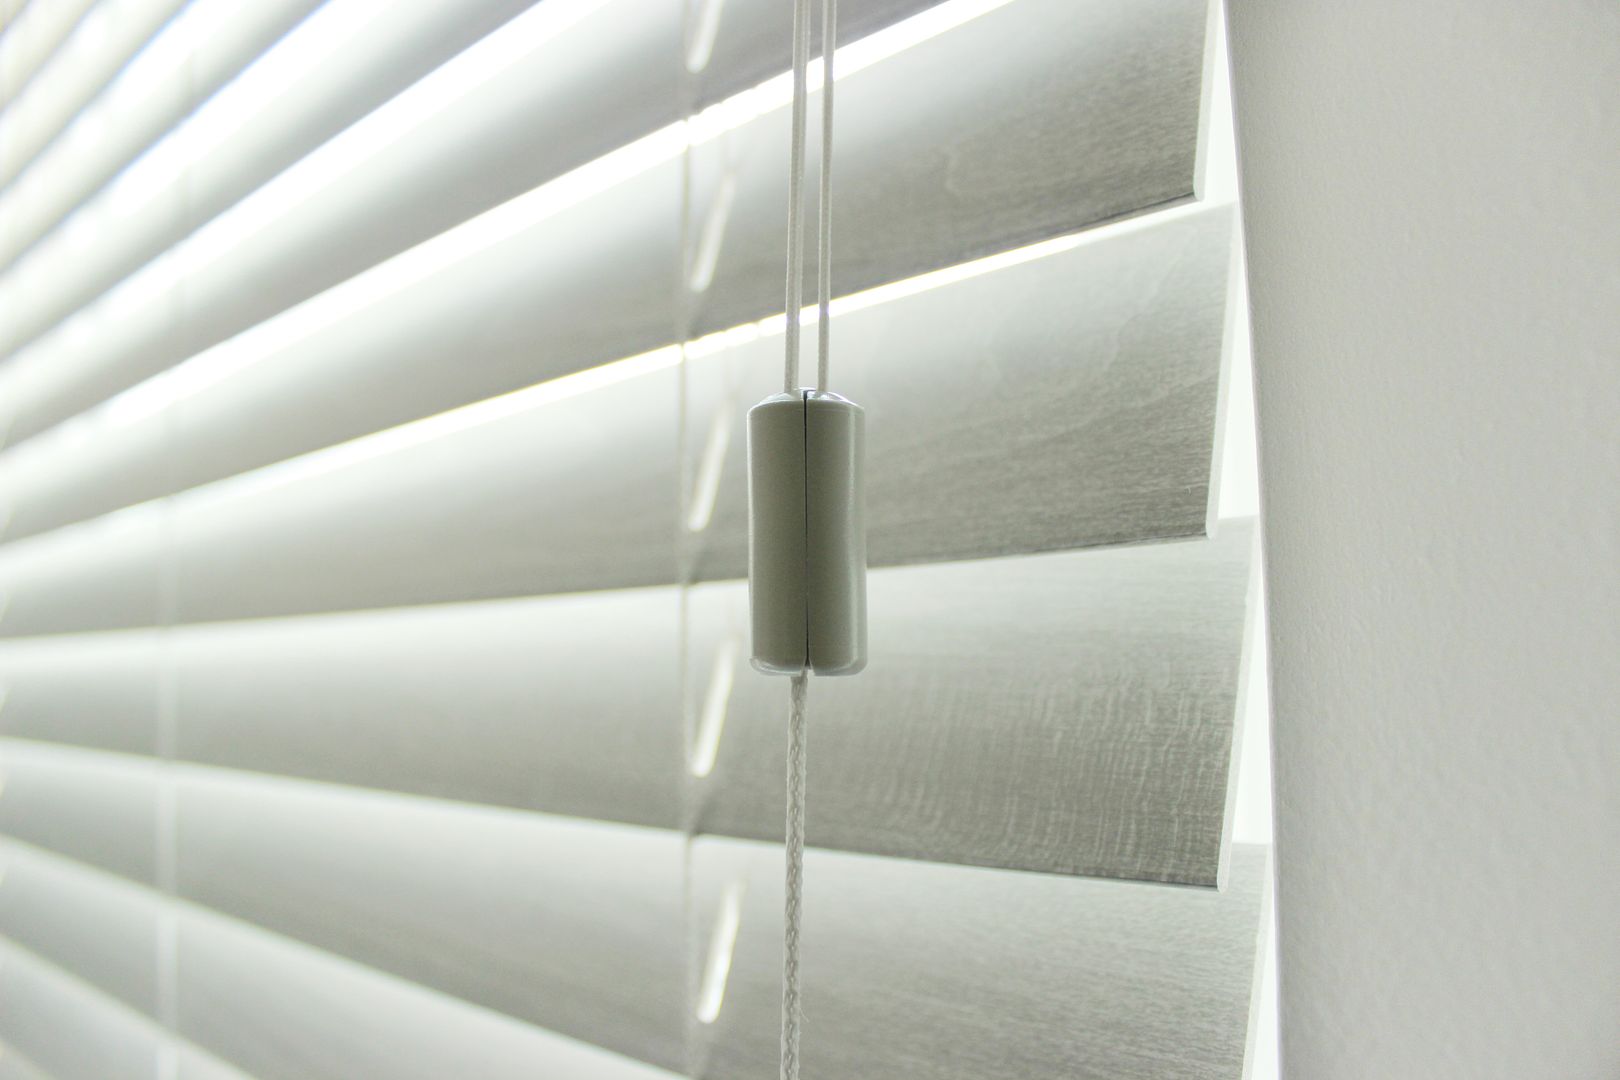 Comfortex Aria Faux Wood Blinds hanging